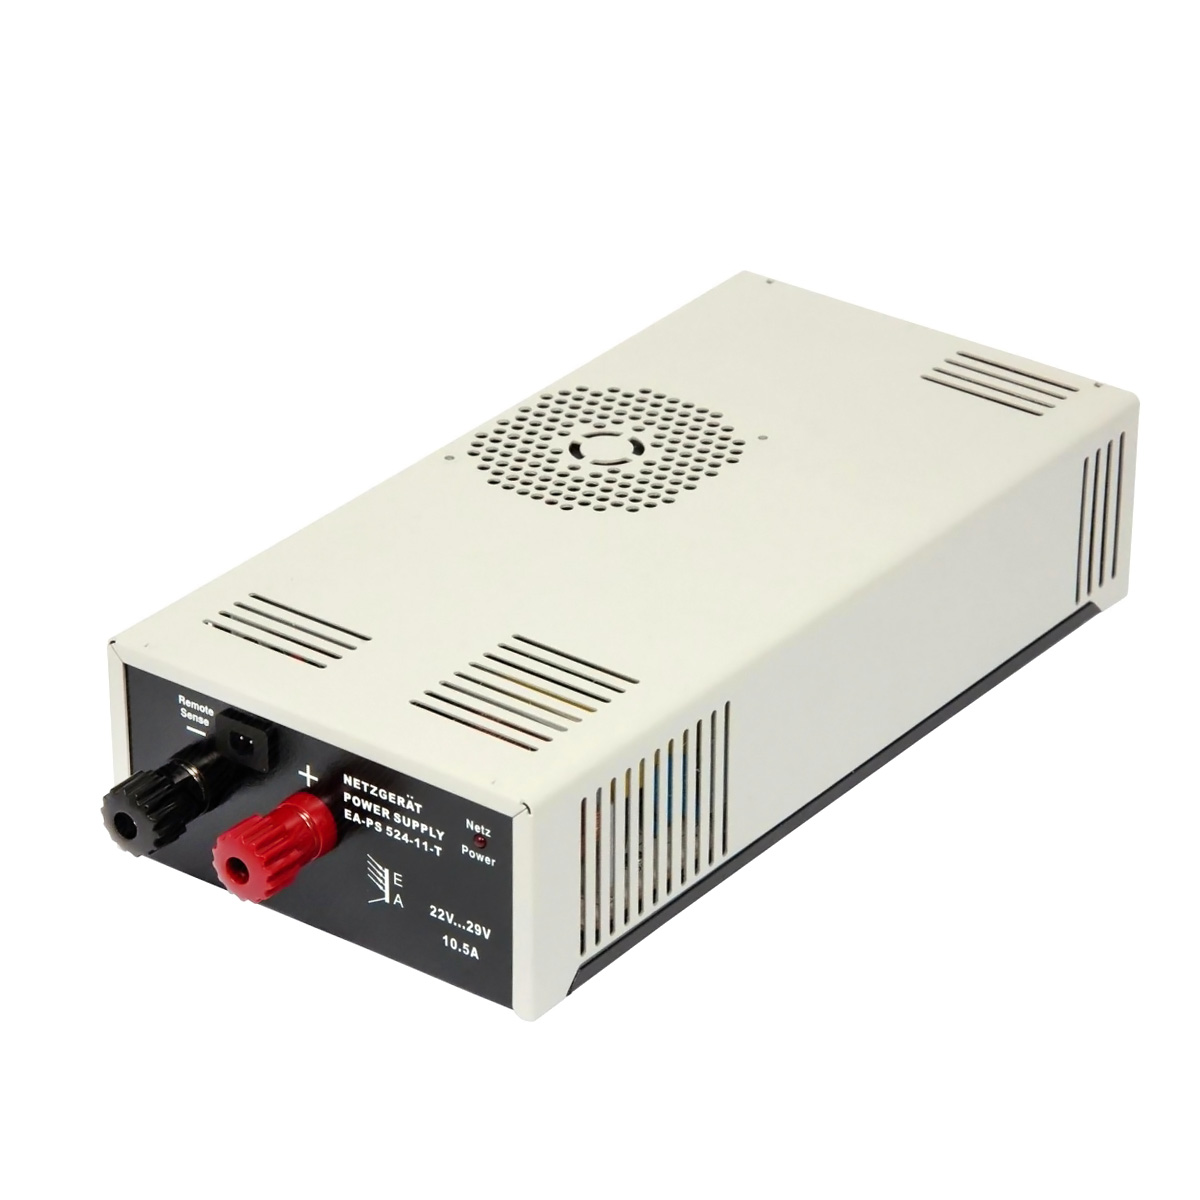 10Micron Stabilised Power-Supply for GM 2000, 3000 & 4000